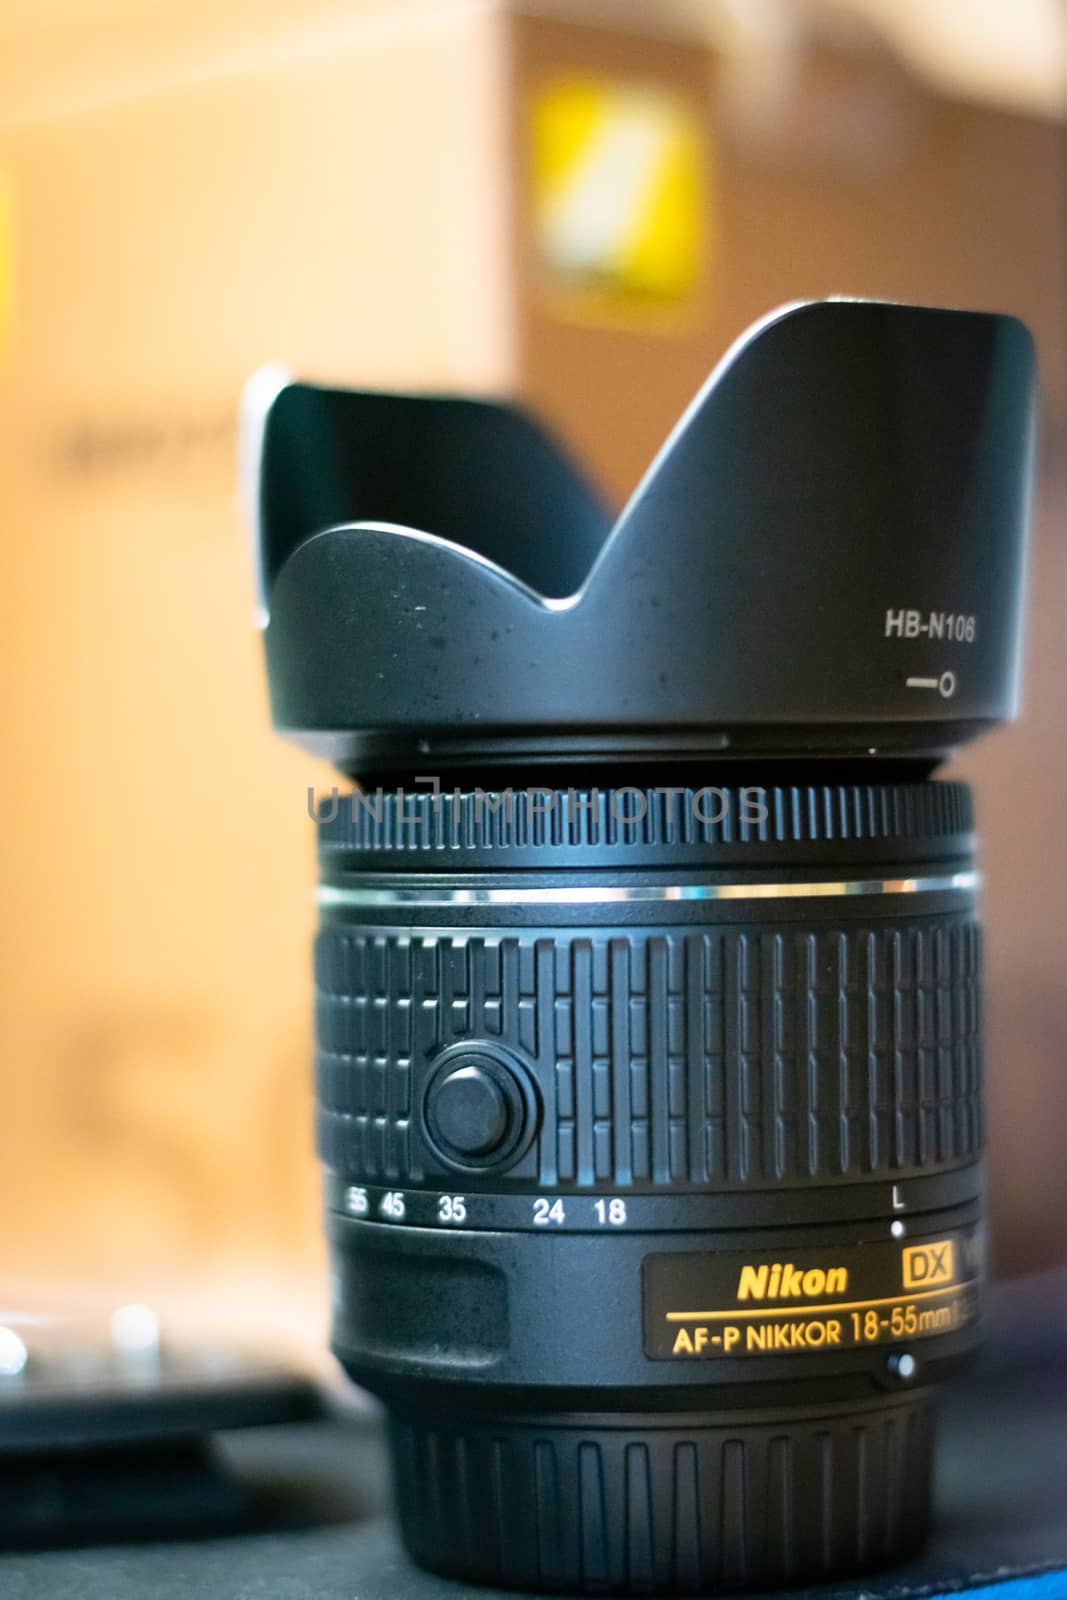 Nikon kit lens 18-55mm with a lens hood on it and it's box behind in the background.